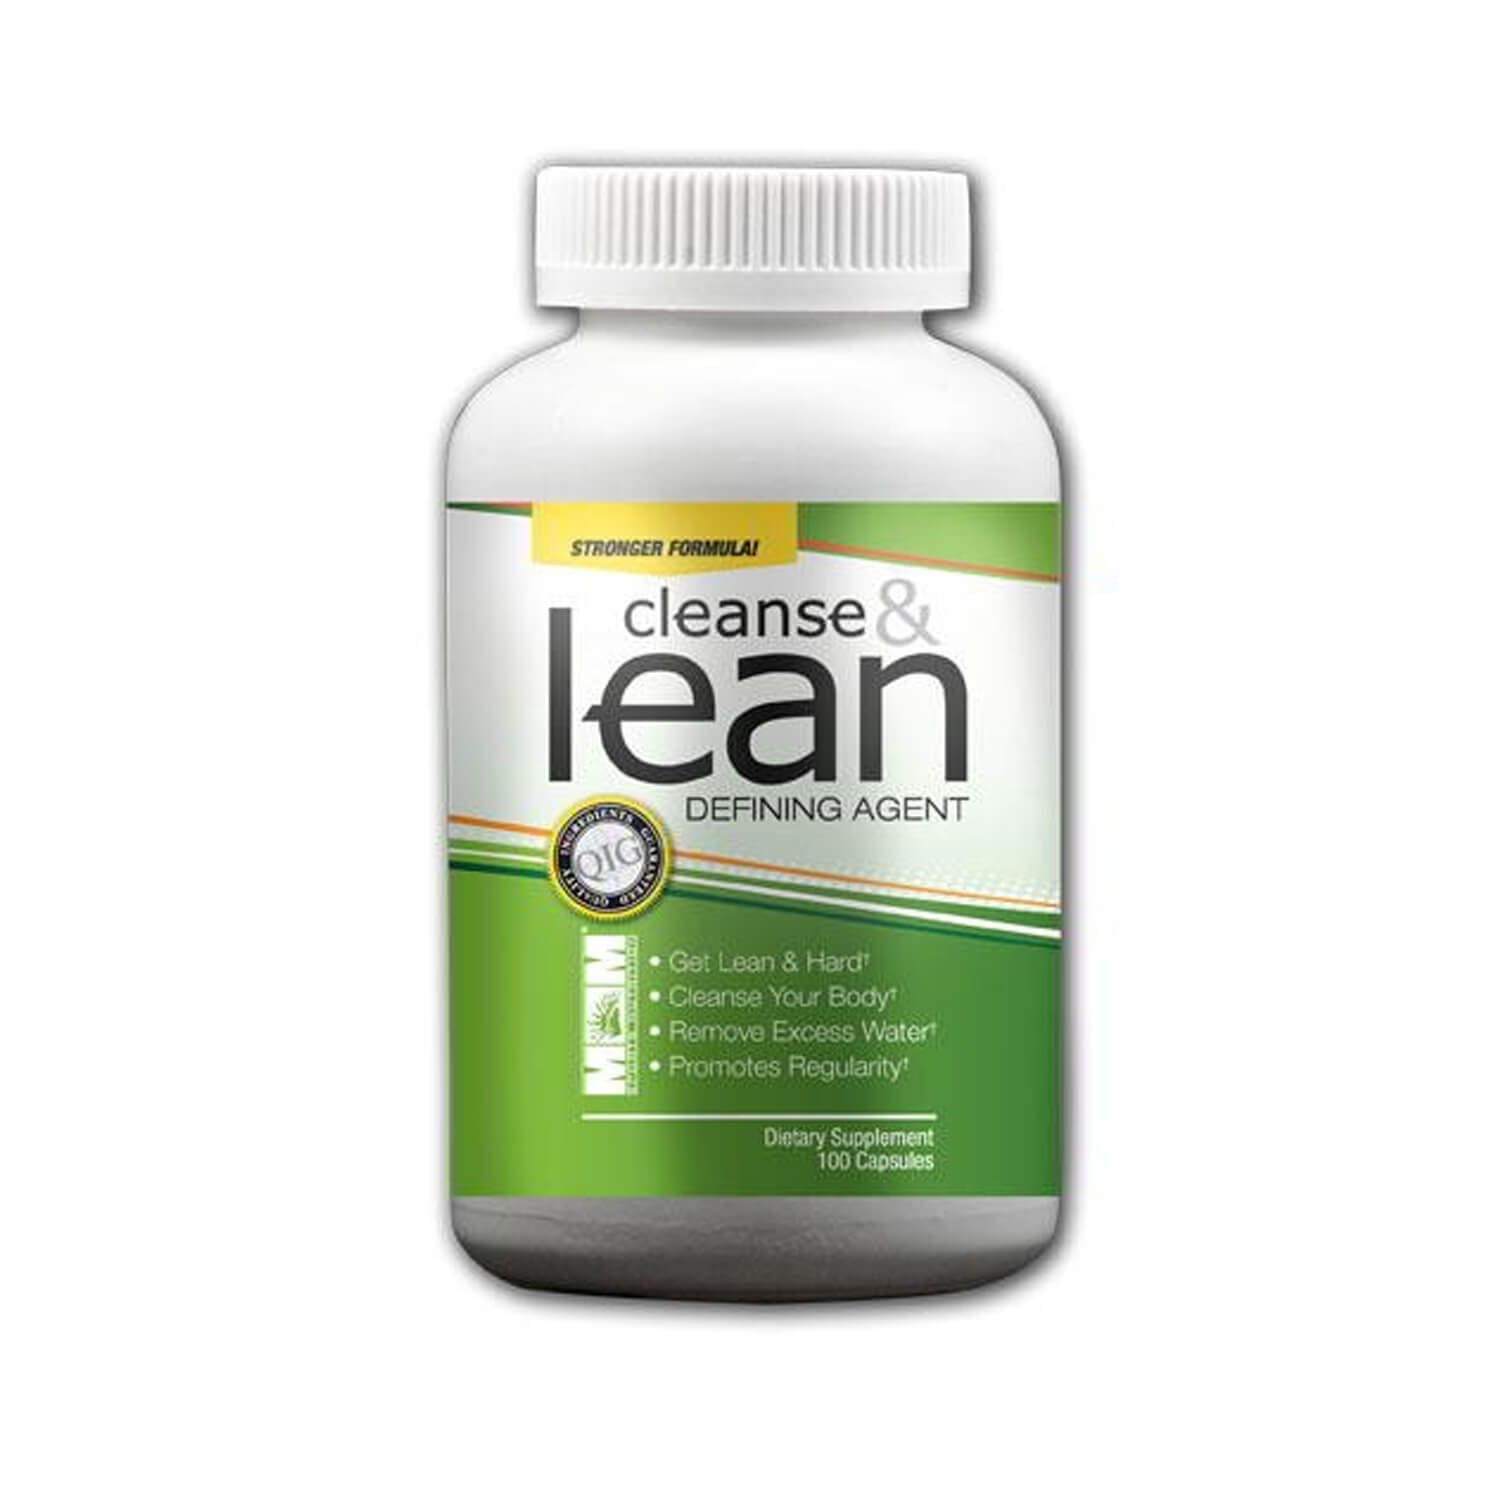 Cleanse and Lean. 100% Lean. Cleanse перевод. MS muscle Cleaner. Cleanse s